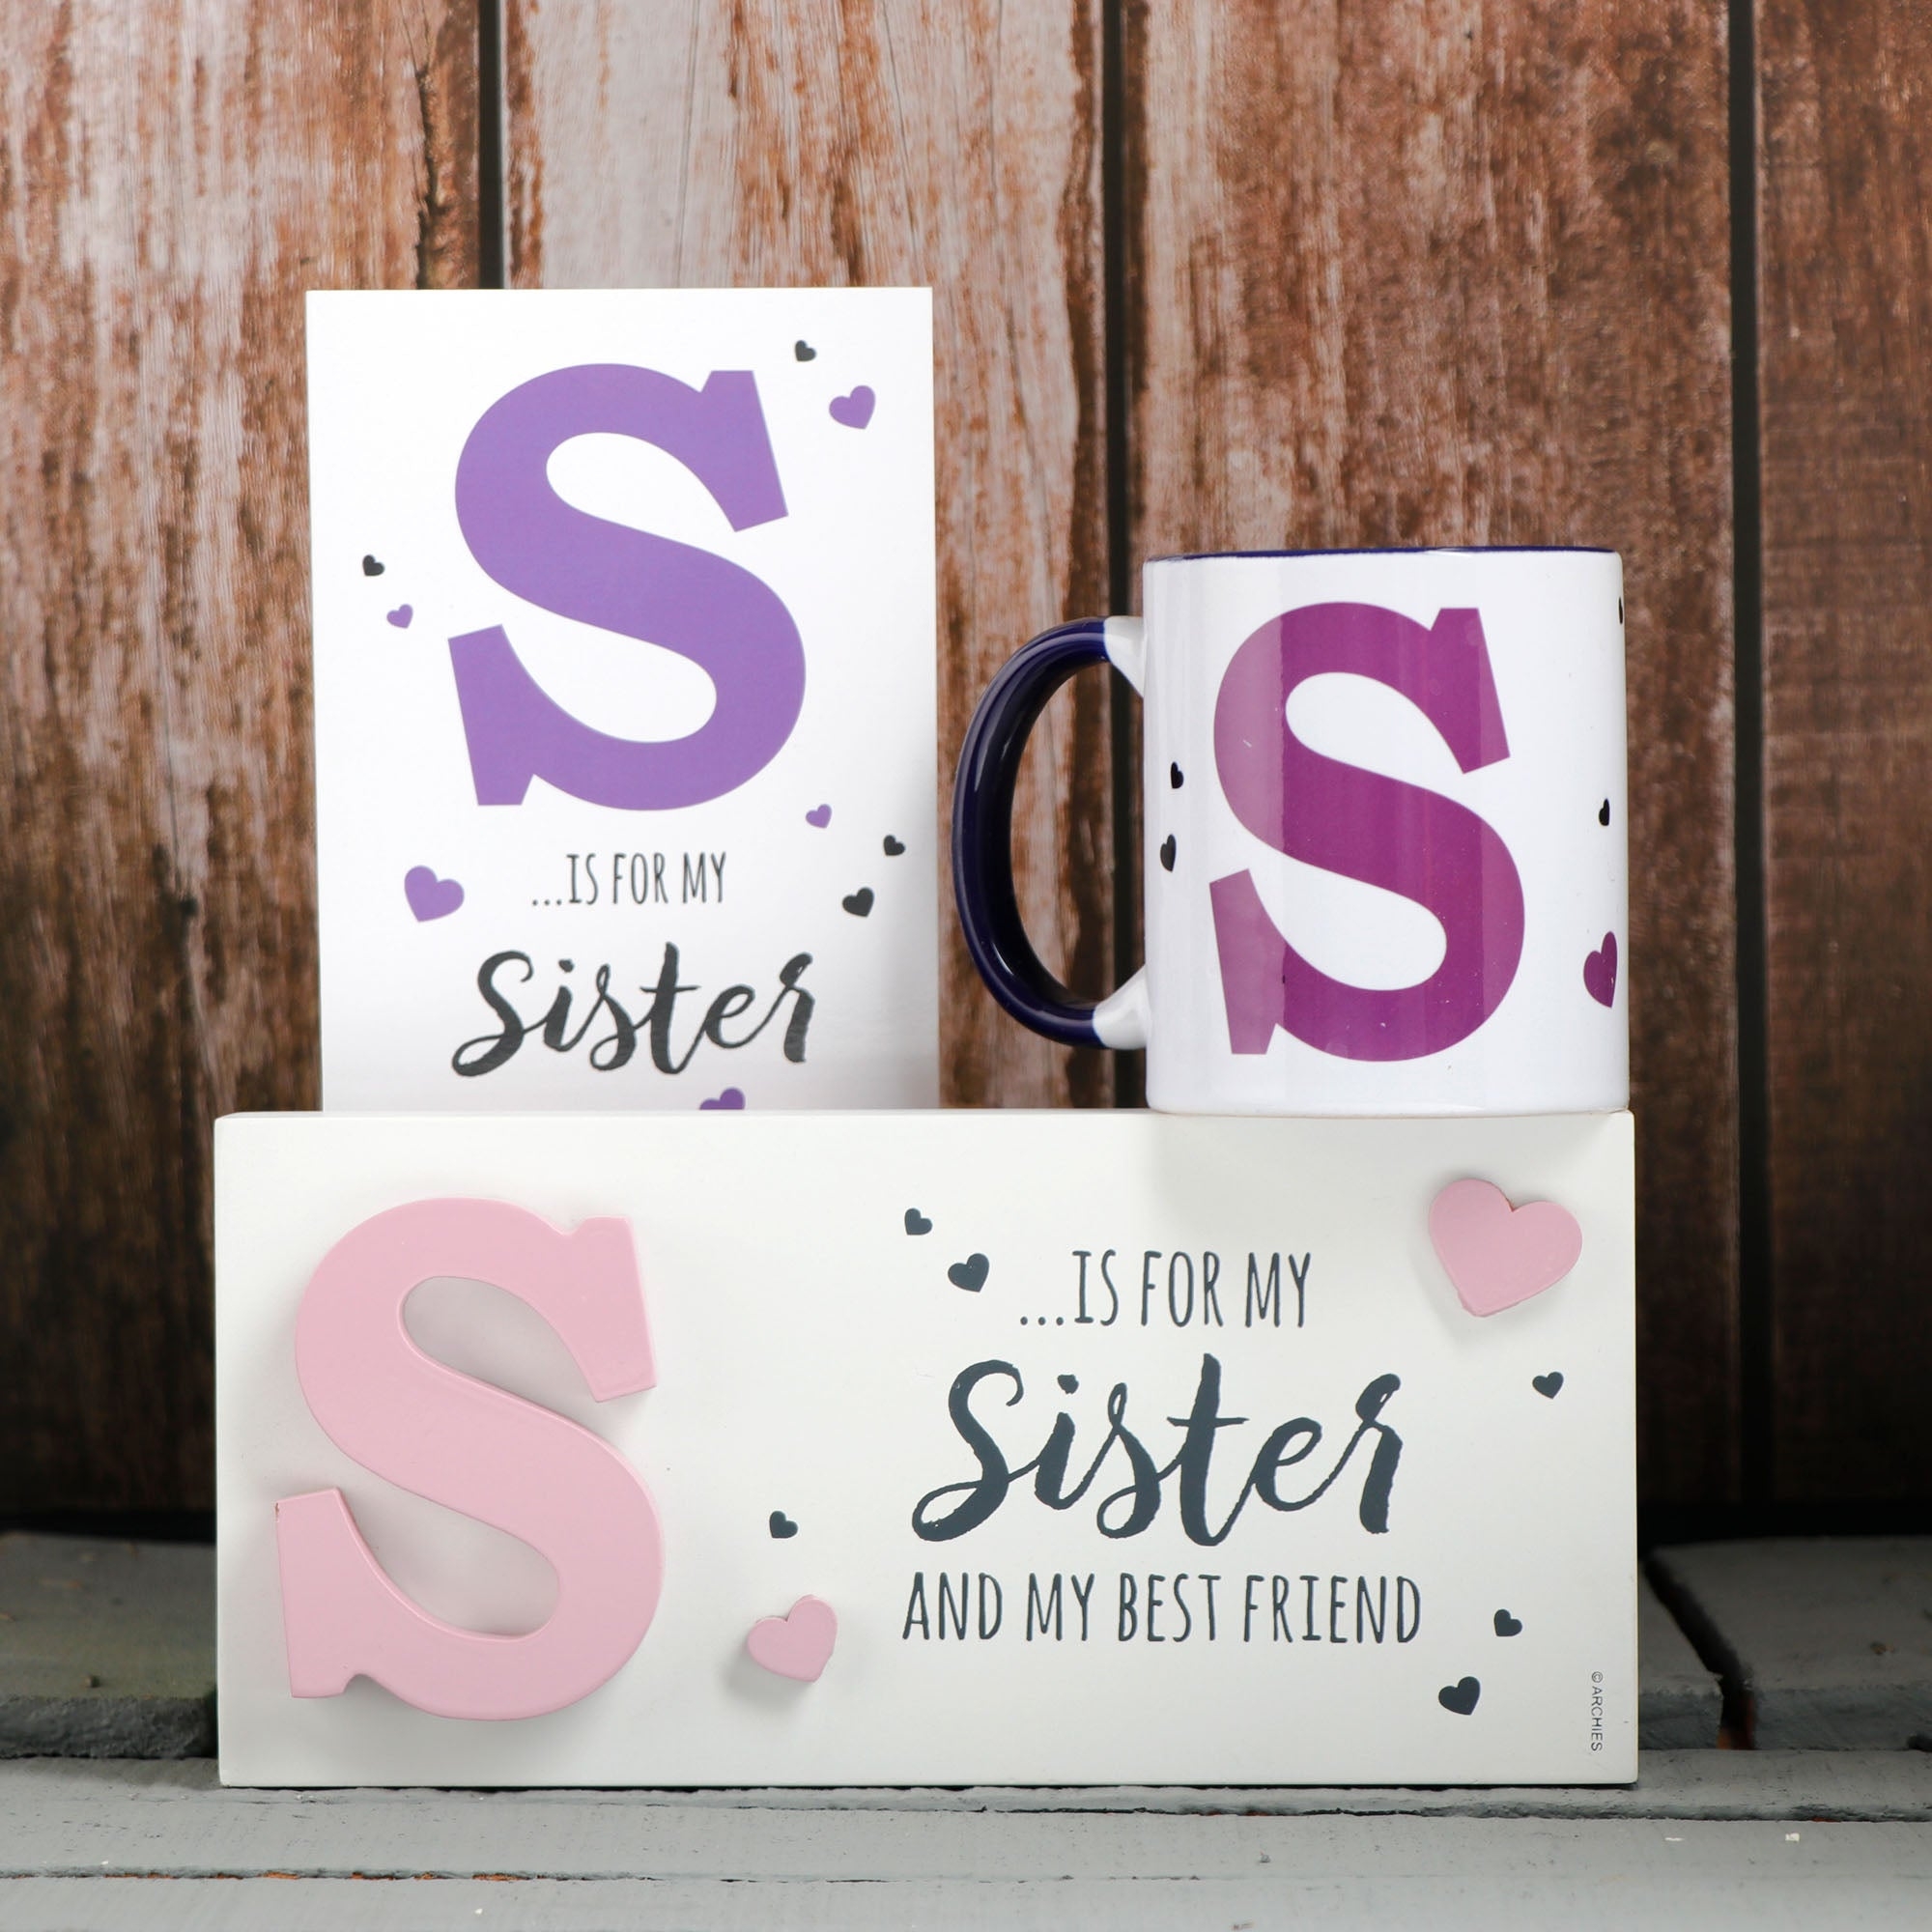 Archies | Archies KEEP SAKE Sister Gift Combo with Ceramic Mug and Elevated Initial Quotation - with a FREE GREETING CARD